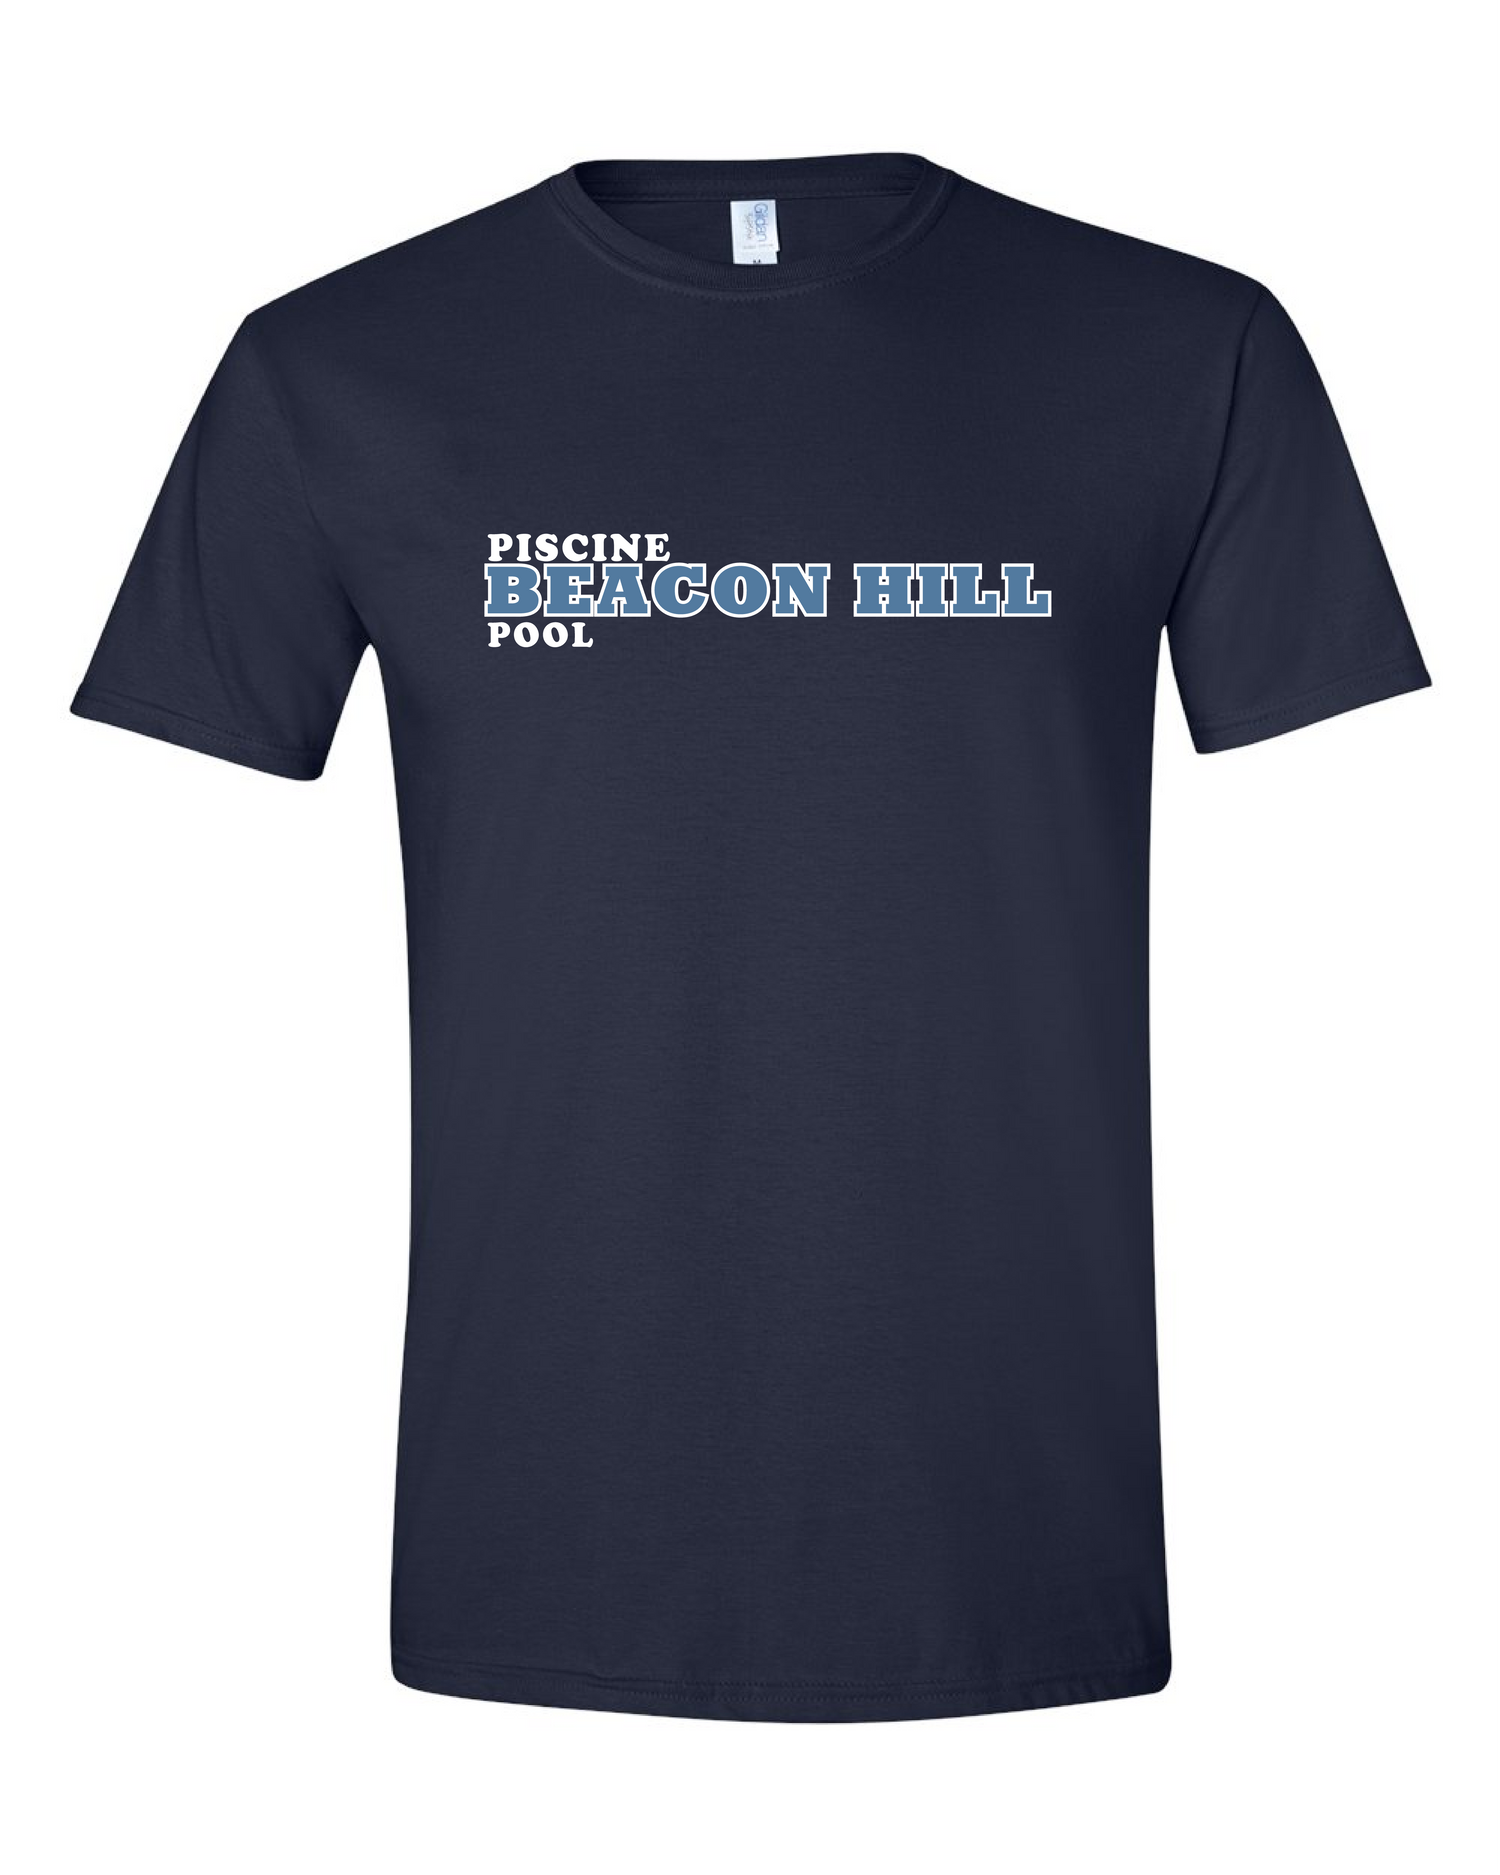 Beacon Hill Pool Dry Fit T-Shirt